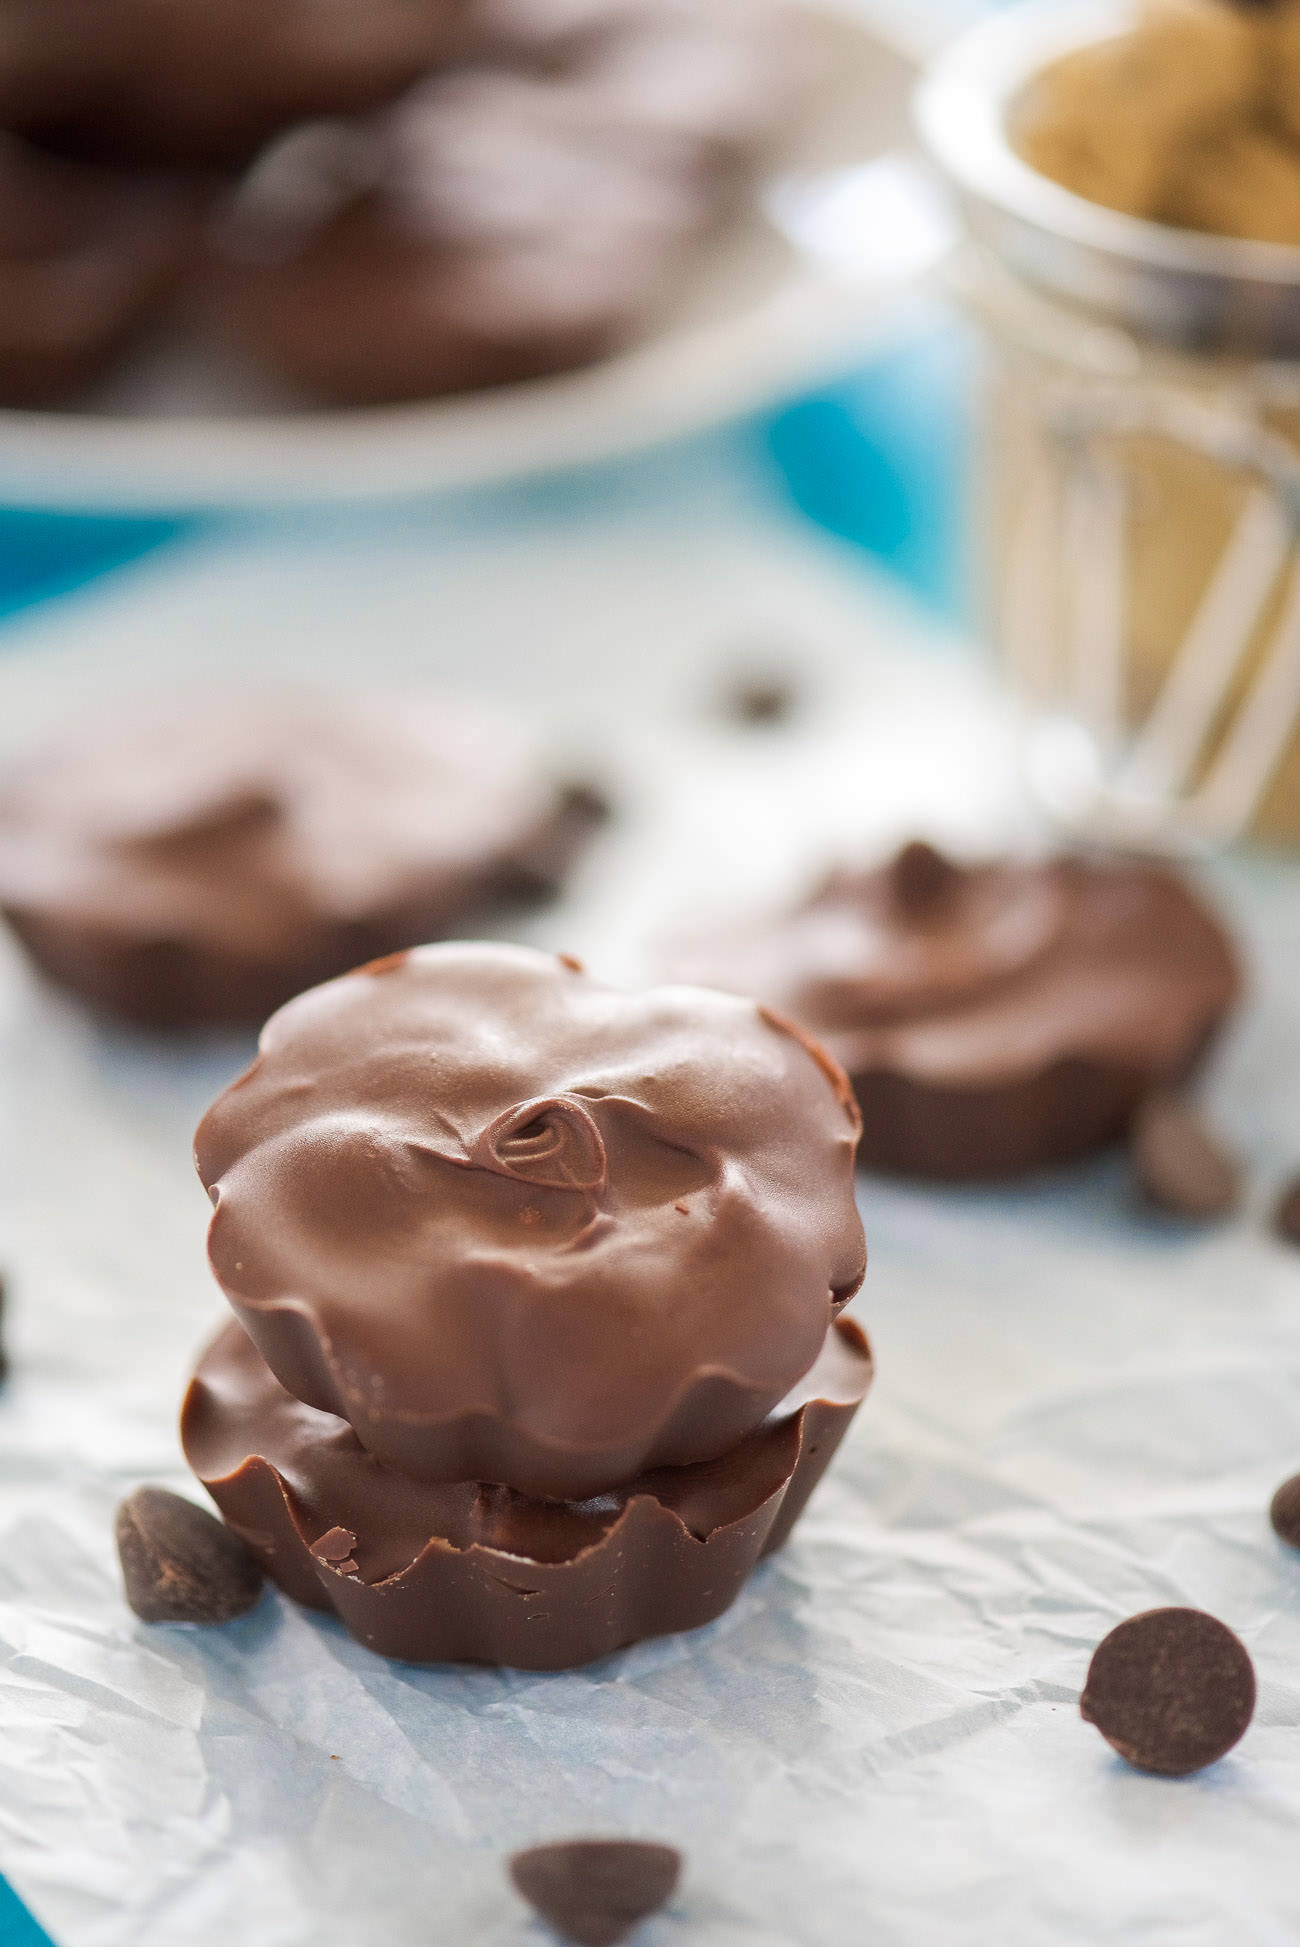 Healthy Cookie Dough Peanut Butter Cups are an upgraded, homemade peanut butter cups! Stuffed with skinny peanut butter cookie dough, these cups are perfect for holidays or to beat that sweet tooth!